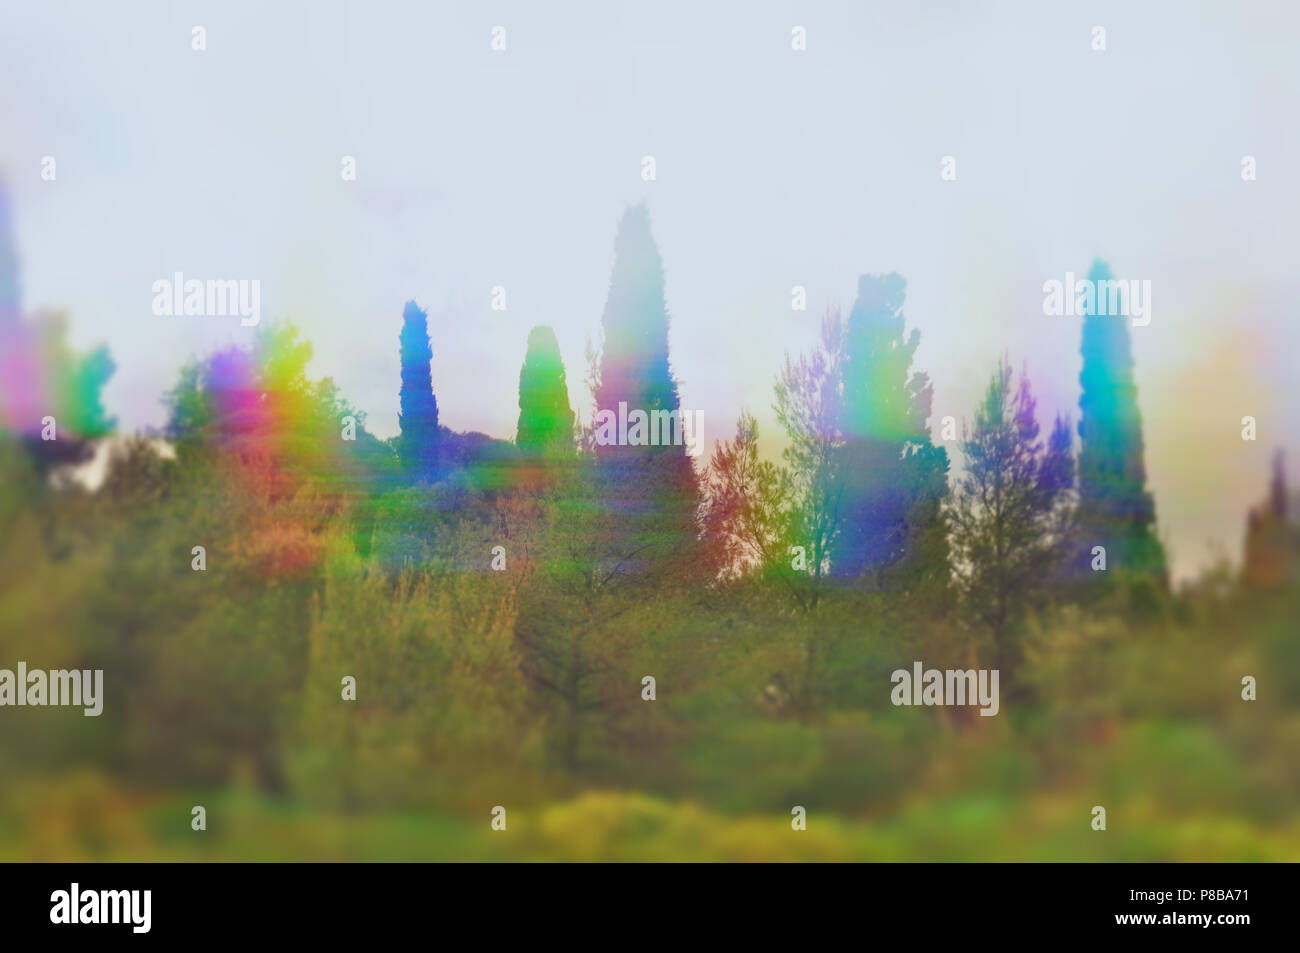 Trees with prism reflections. Colorful landscape abstract blur. Stock Photo